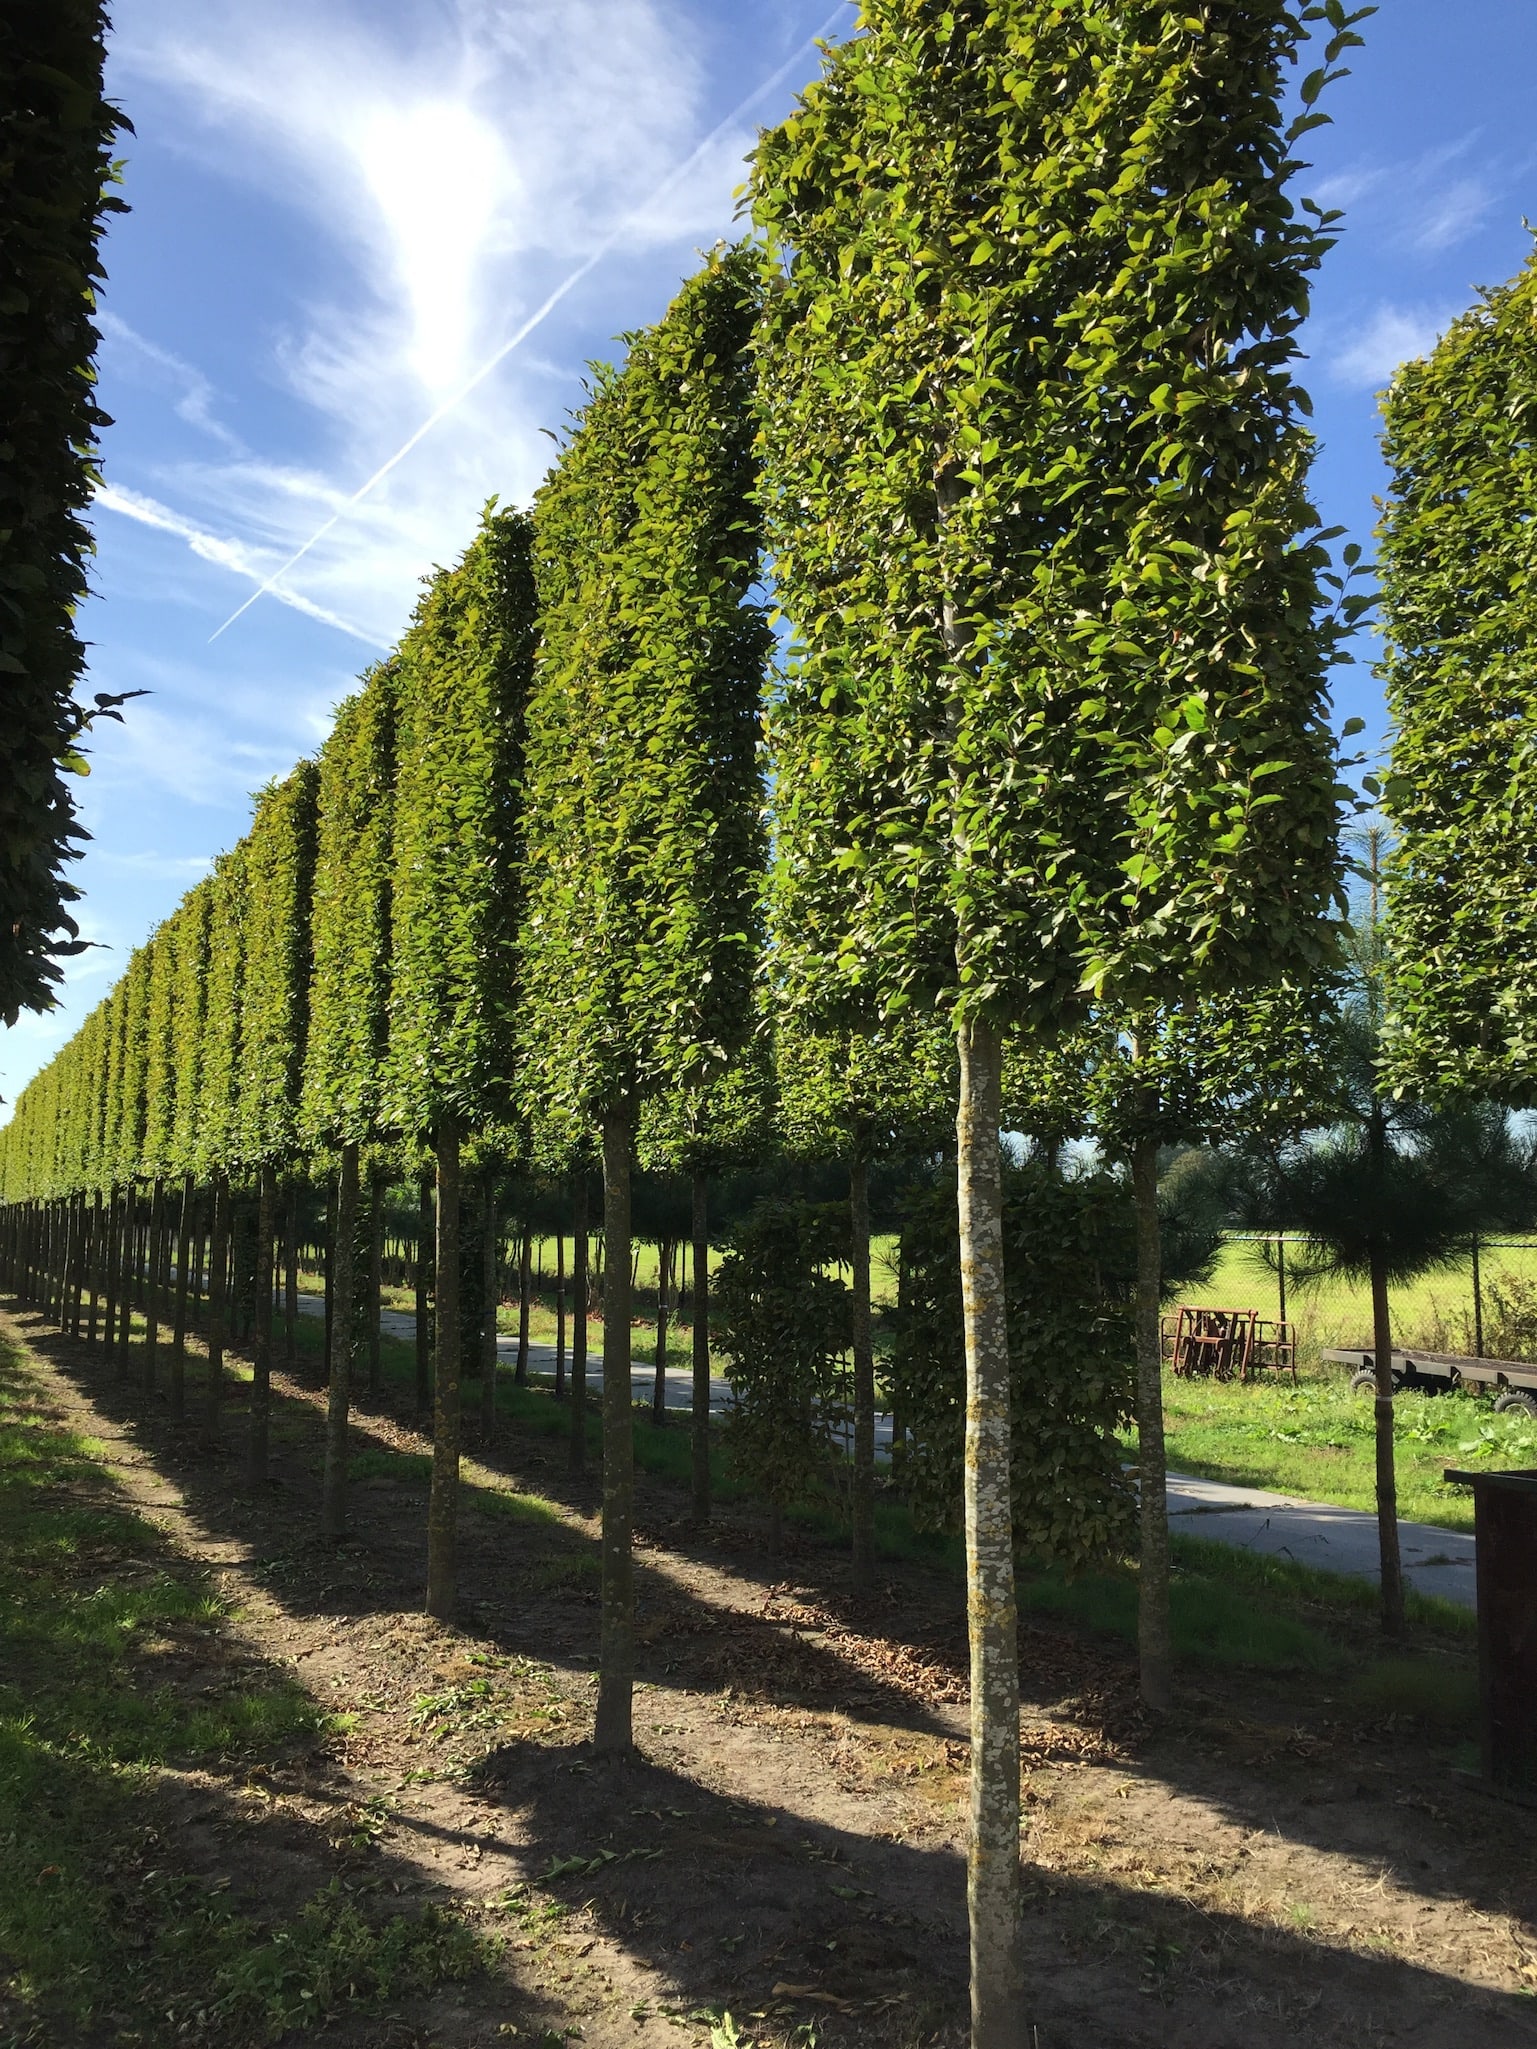 rows of pleached trees growing